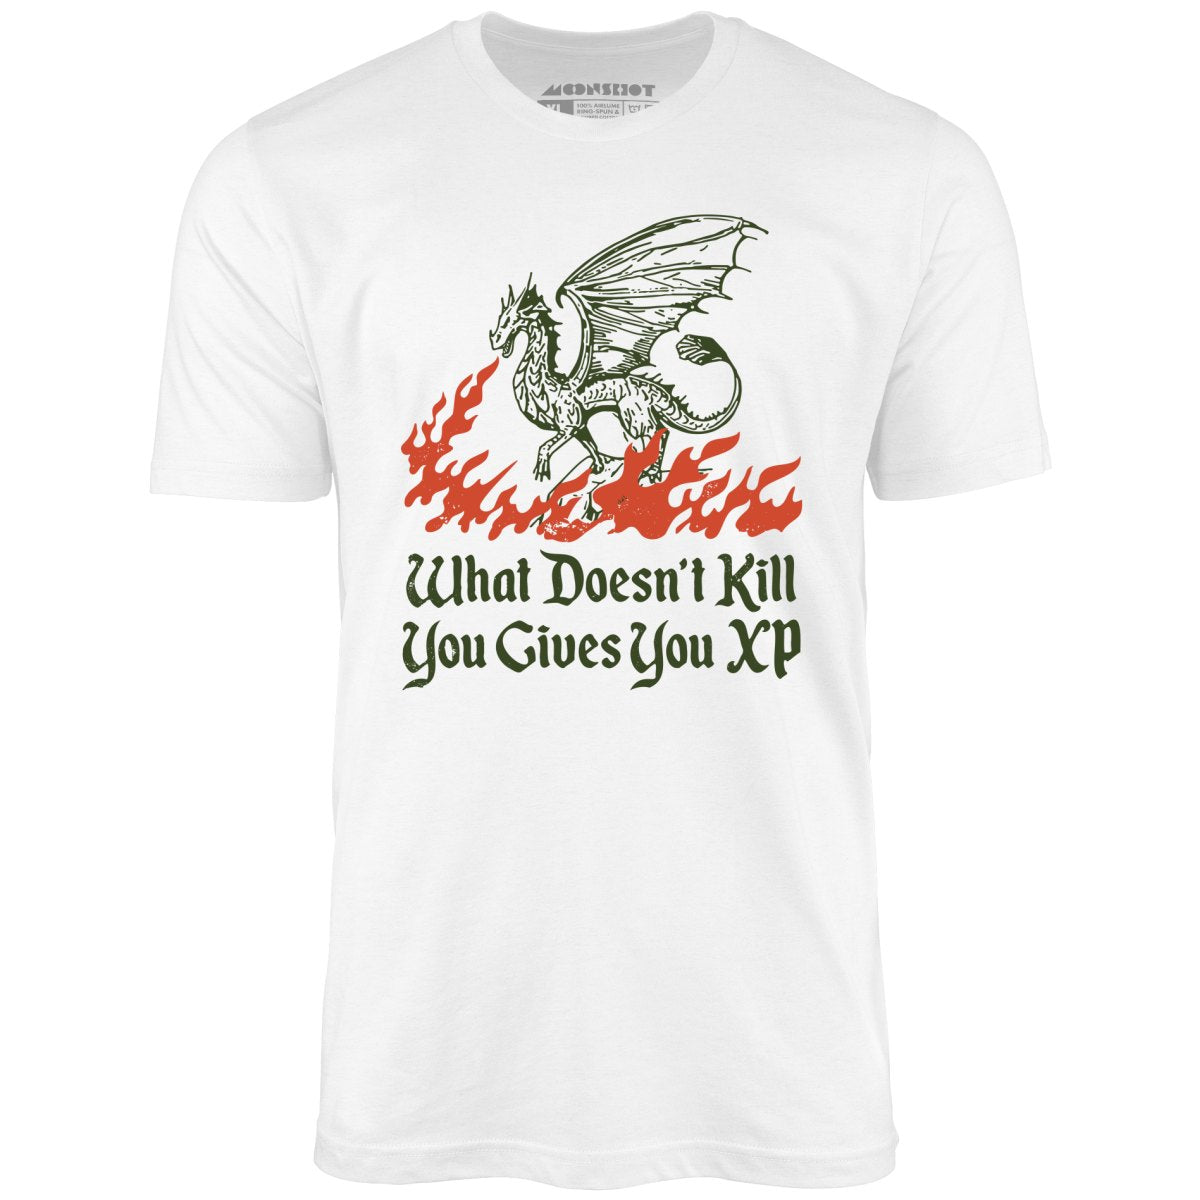 What Doesn't Kill You Gives You XP - Unisex T-Shirt